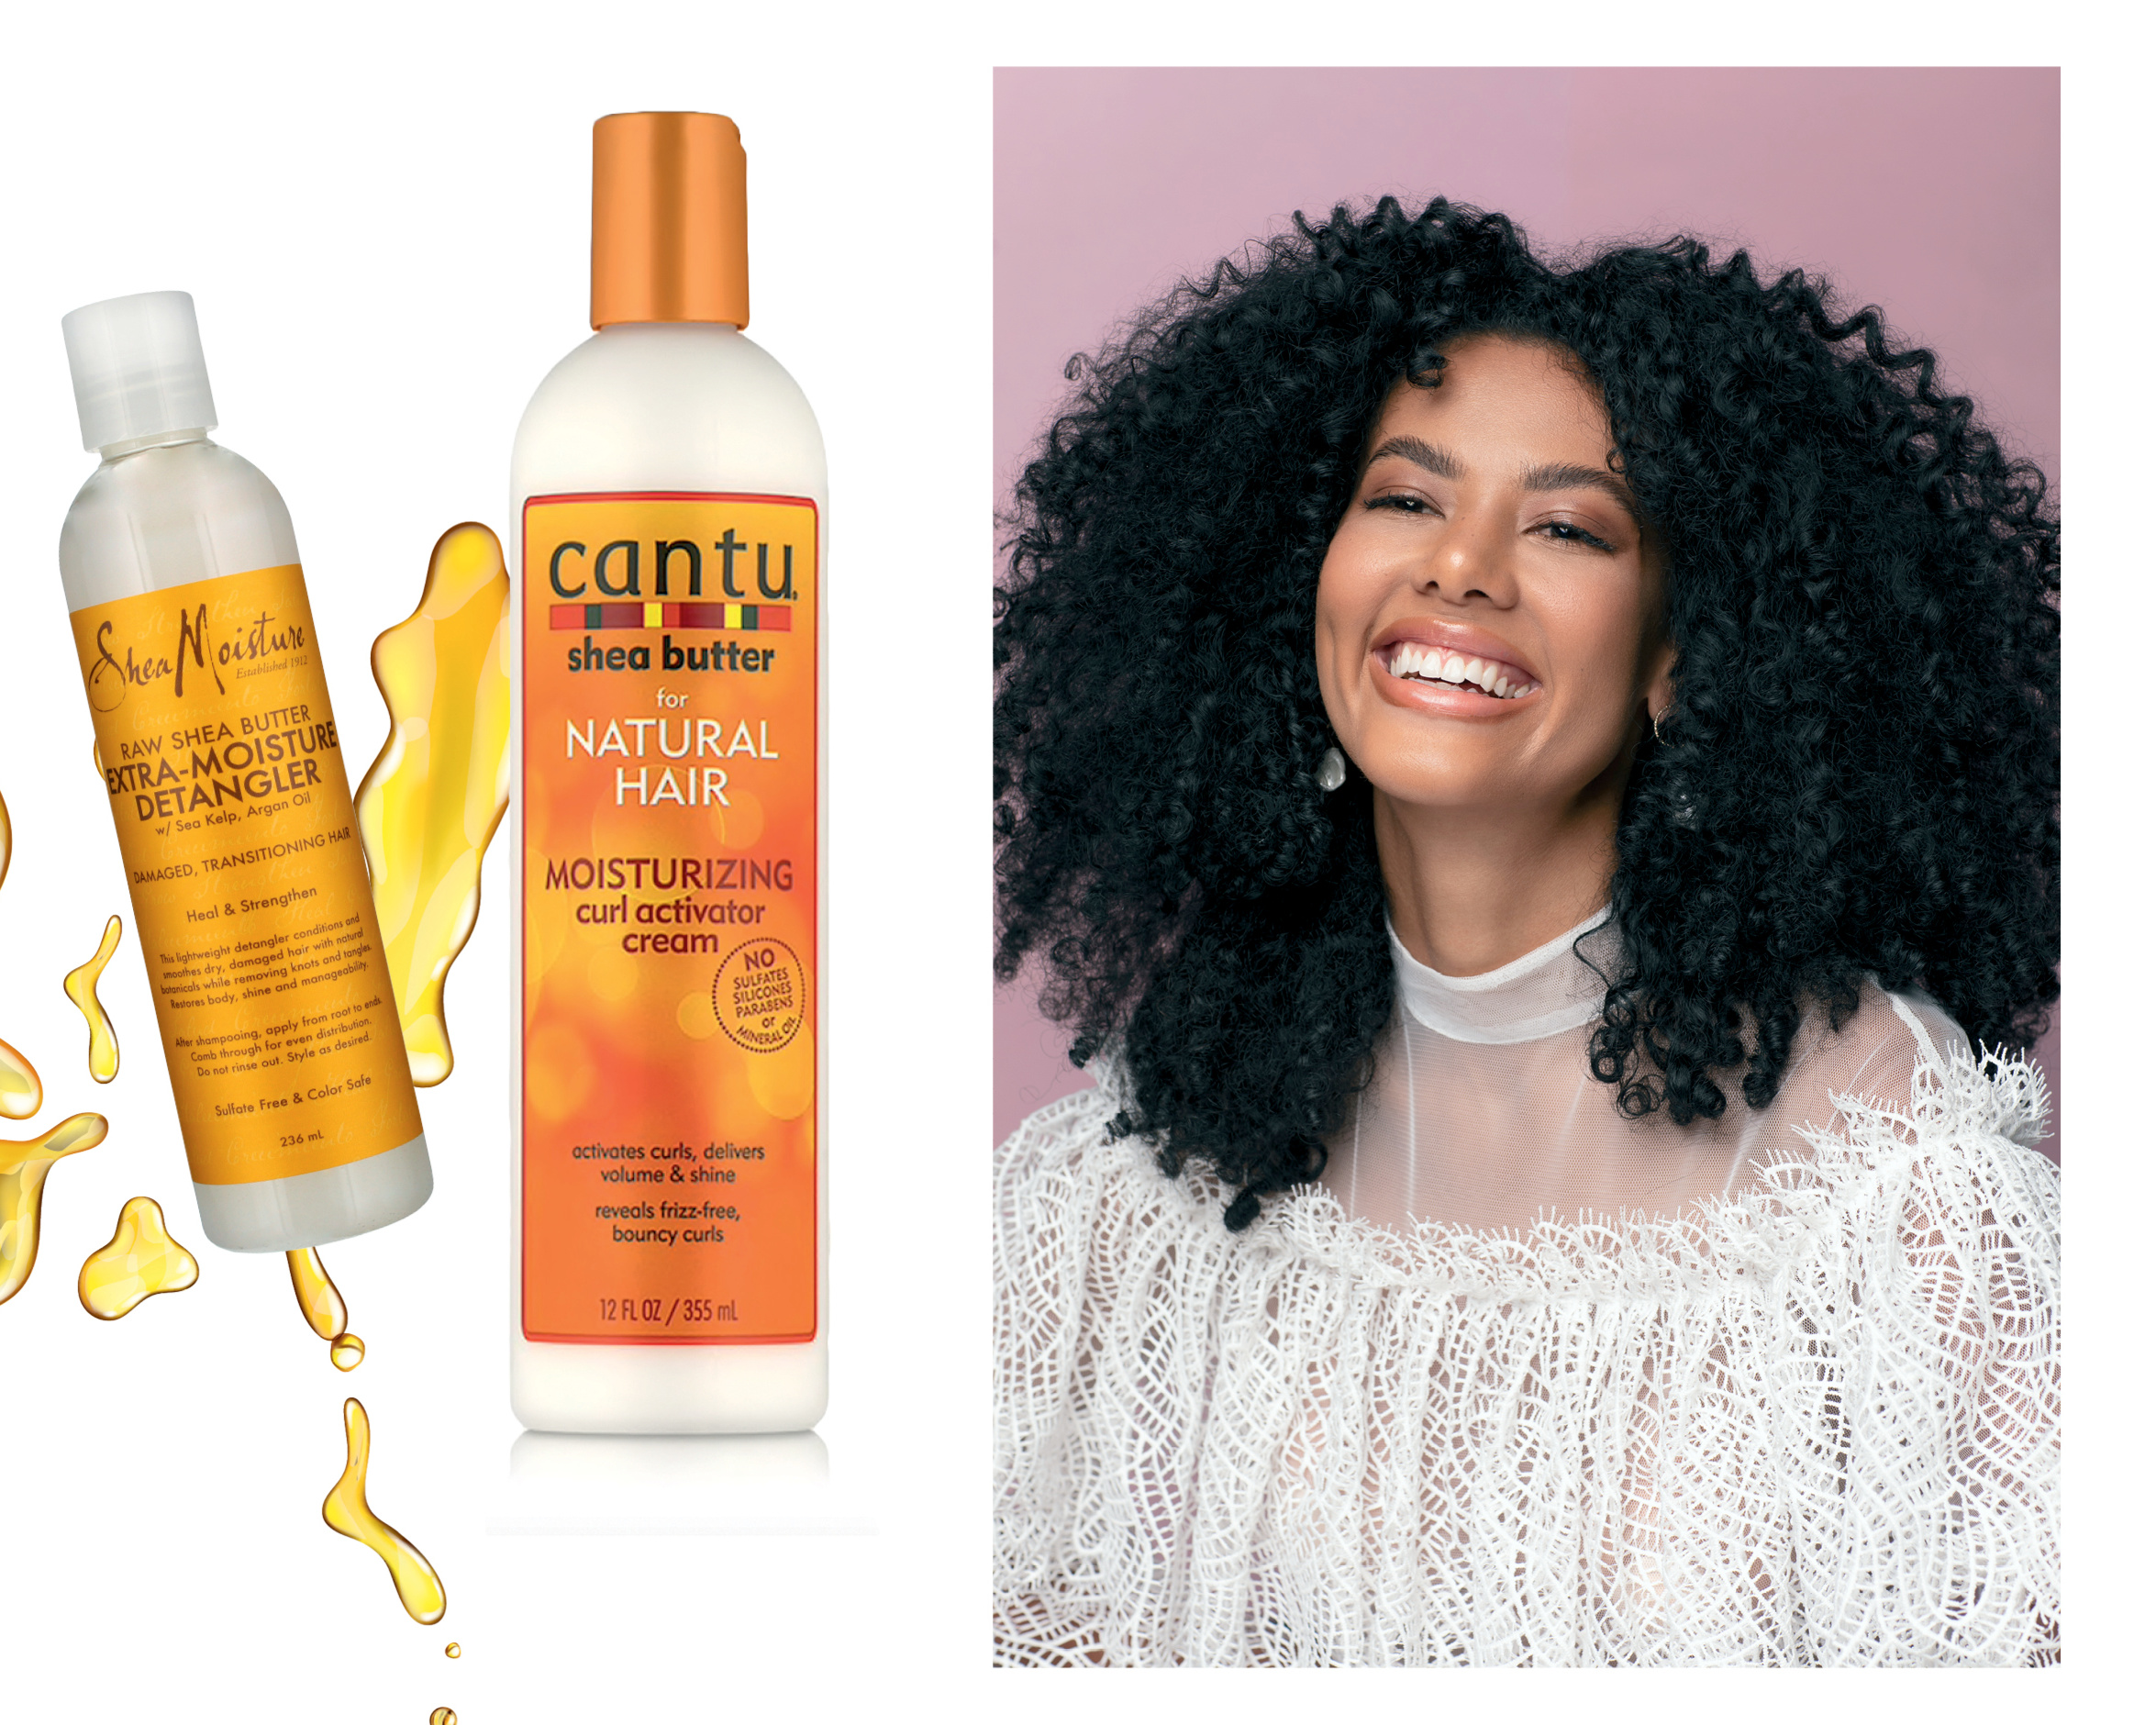 How to style curly hair - TFG Media